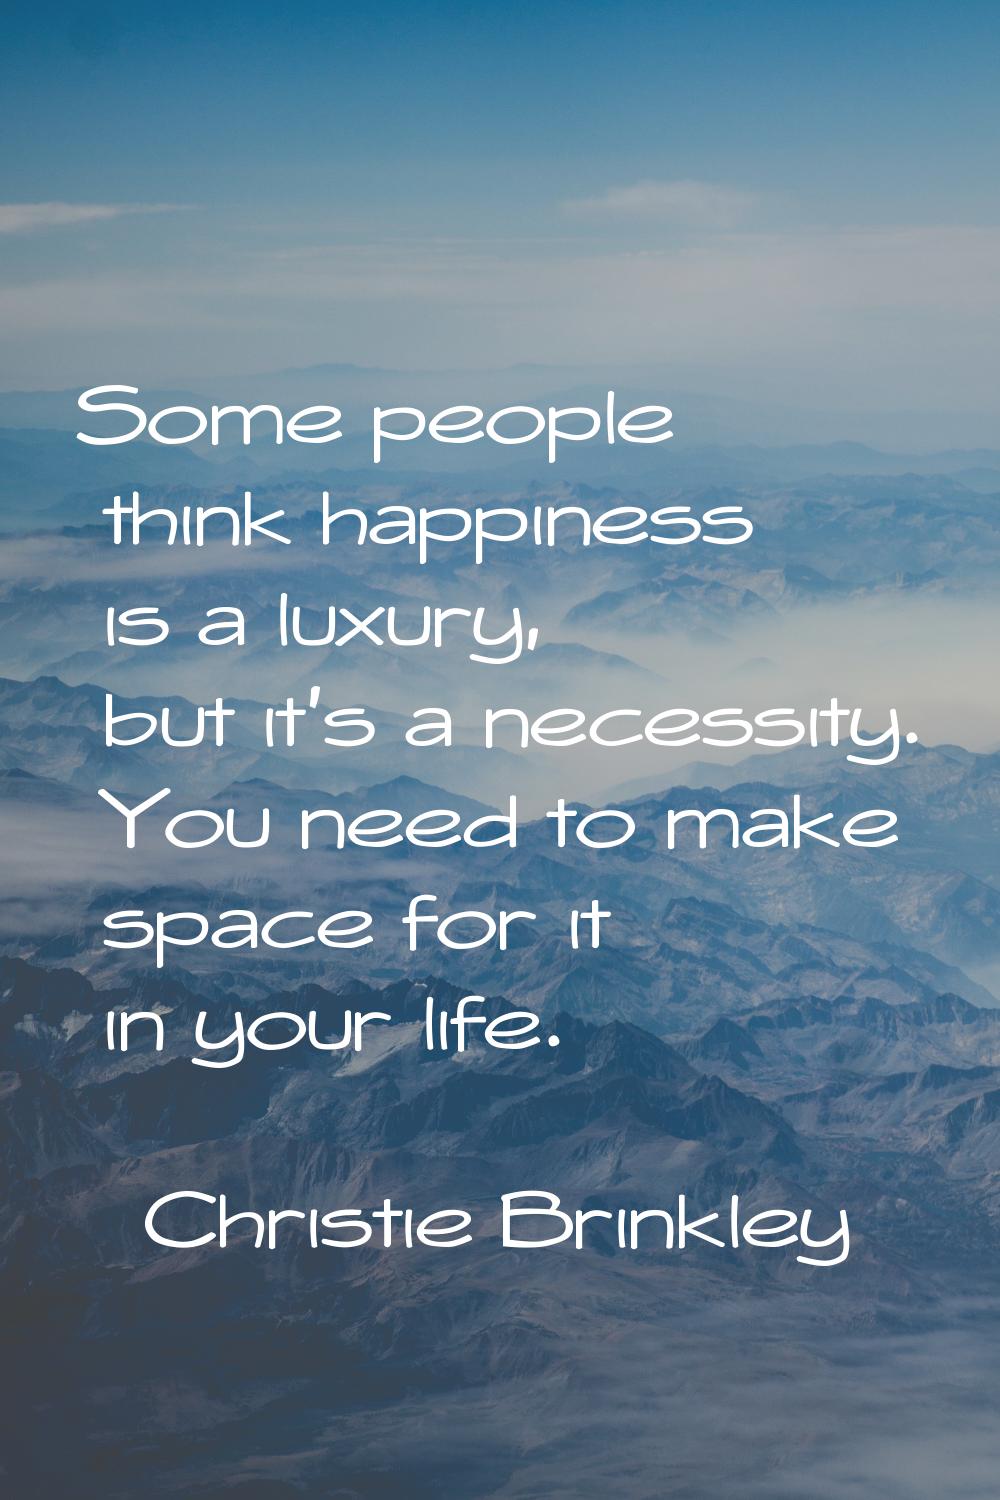 Some people think happiness is a luxury, but it's a necessity. You need to make space for it in you